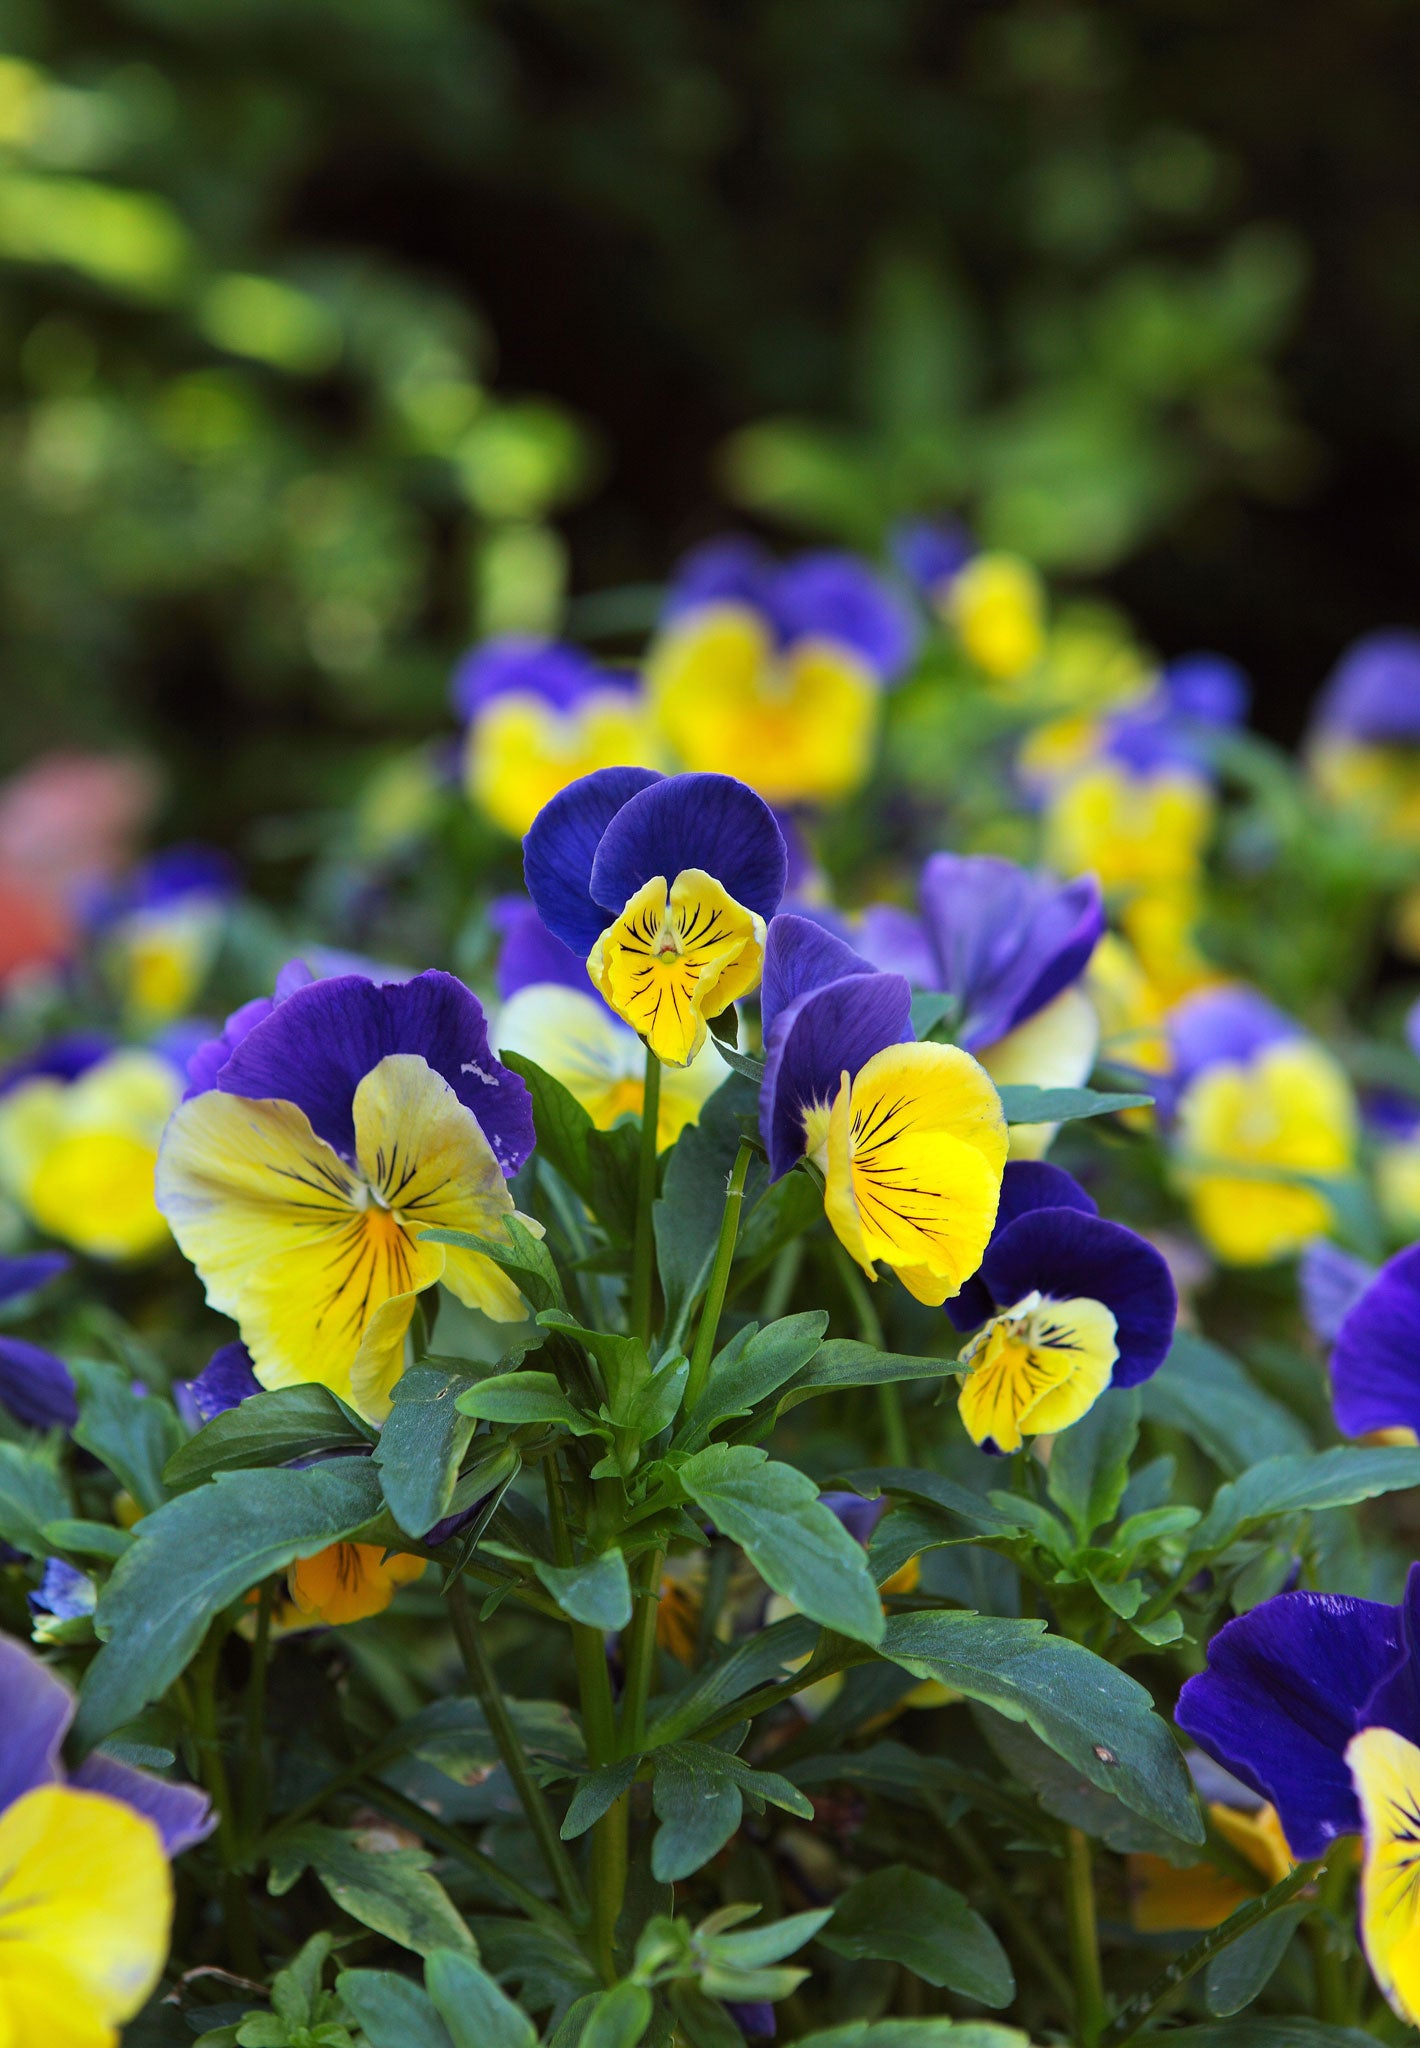 Cut violas back to ground level and cover with a finely-sifted mixture of soil or compost and sand mixed